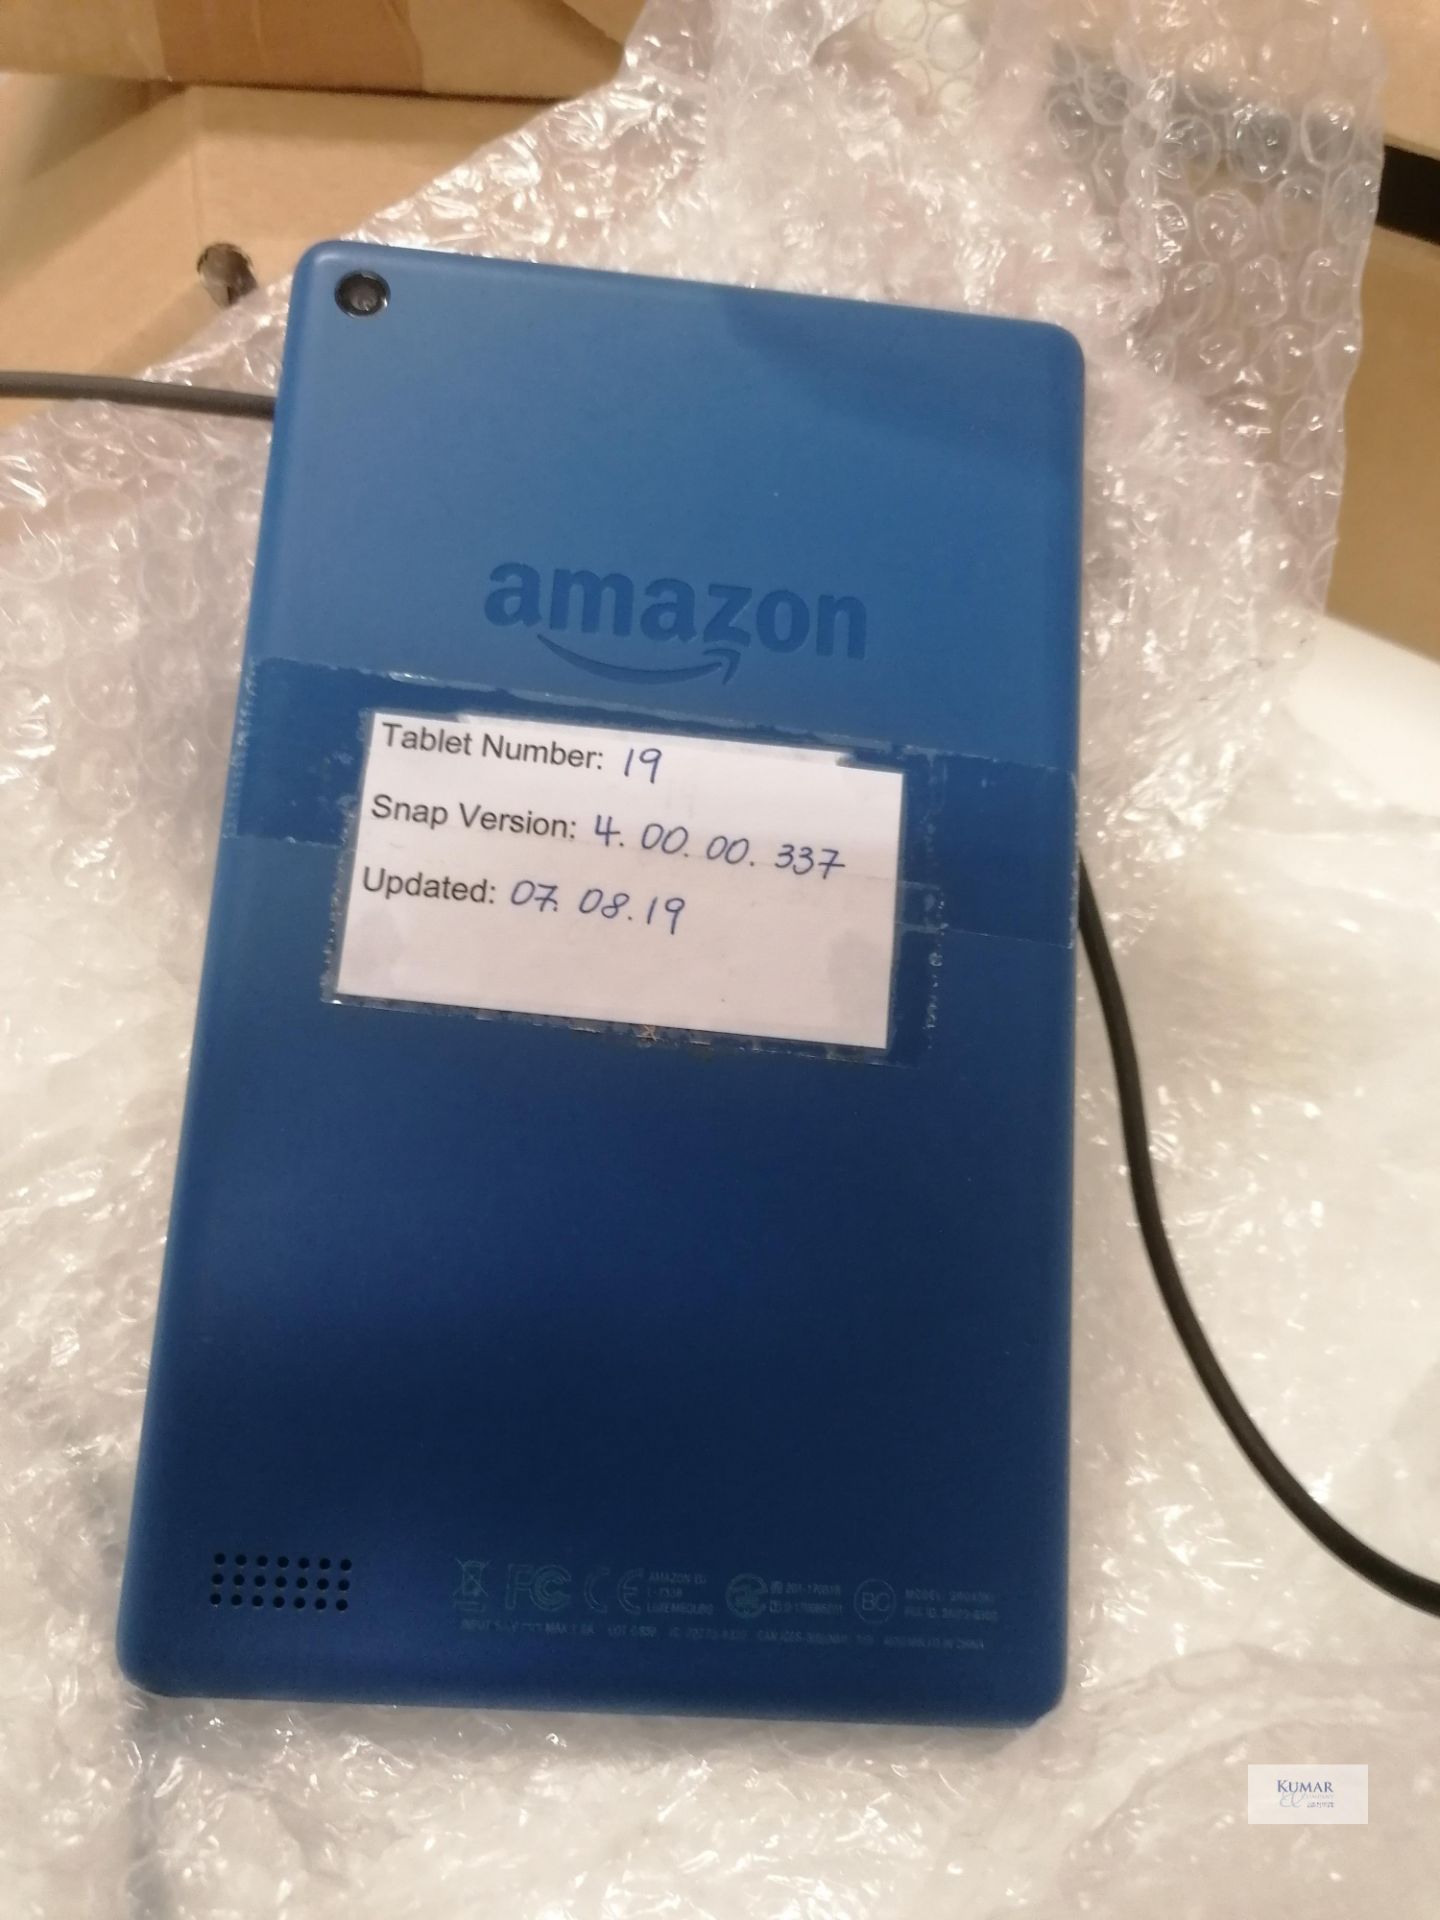 Amazon Fire 7.7" Touch screen Model No SRO43KL Updated07 08 2019 Cable and charger - Image 2 of 3